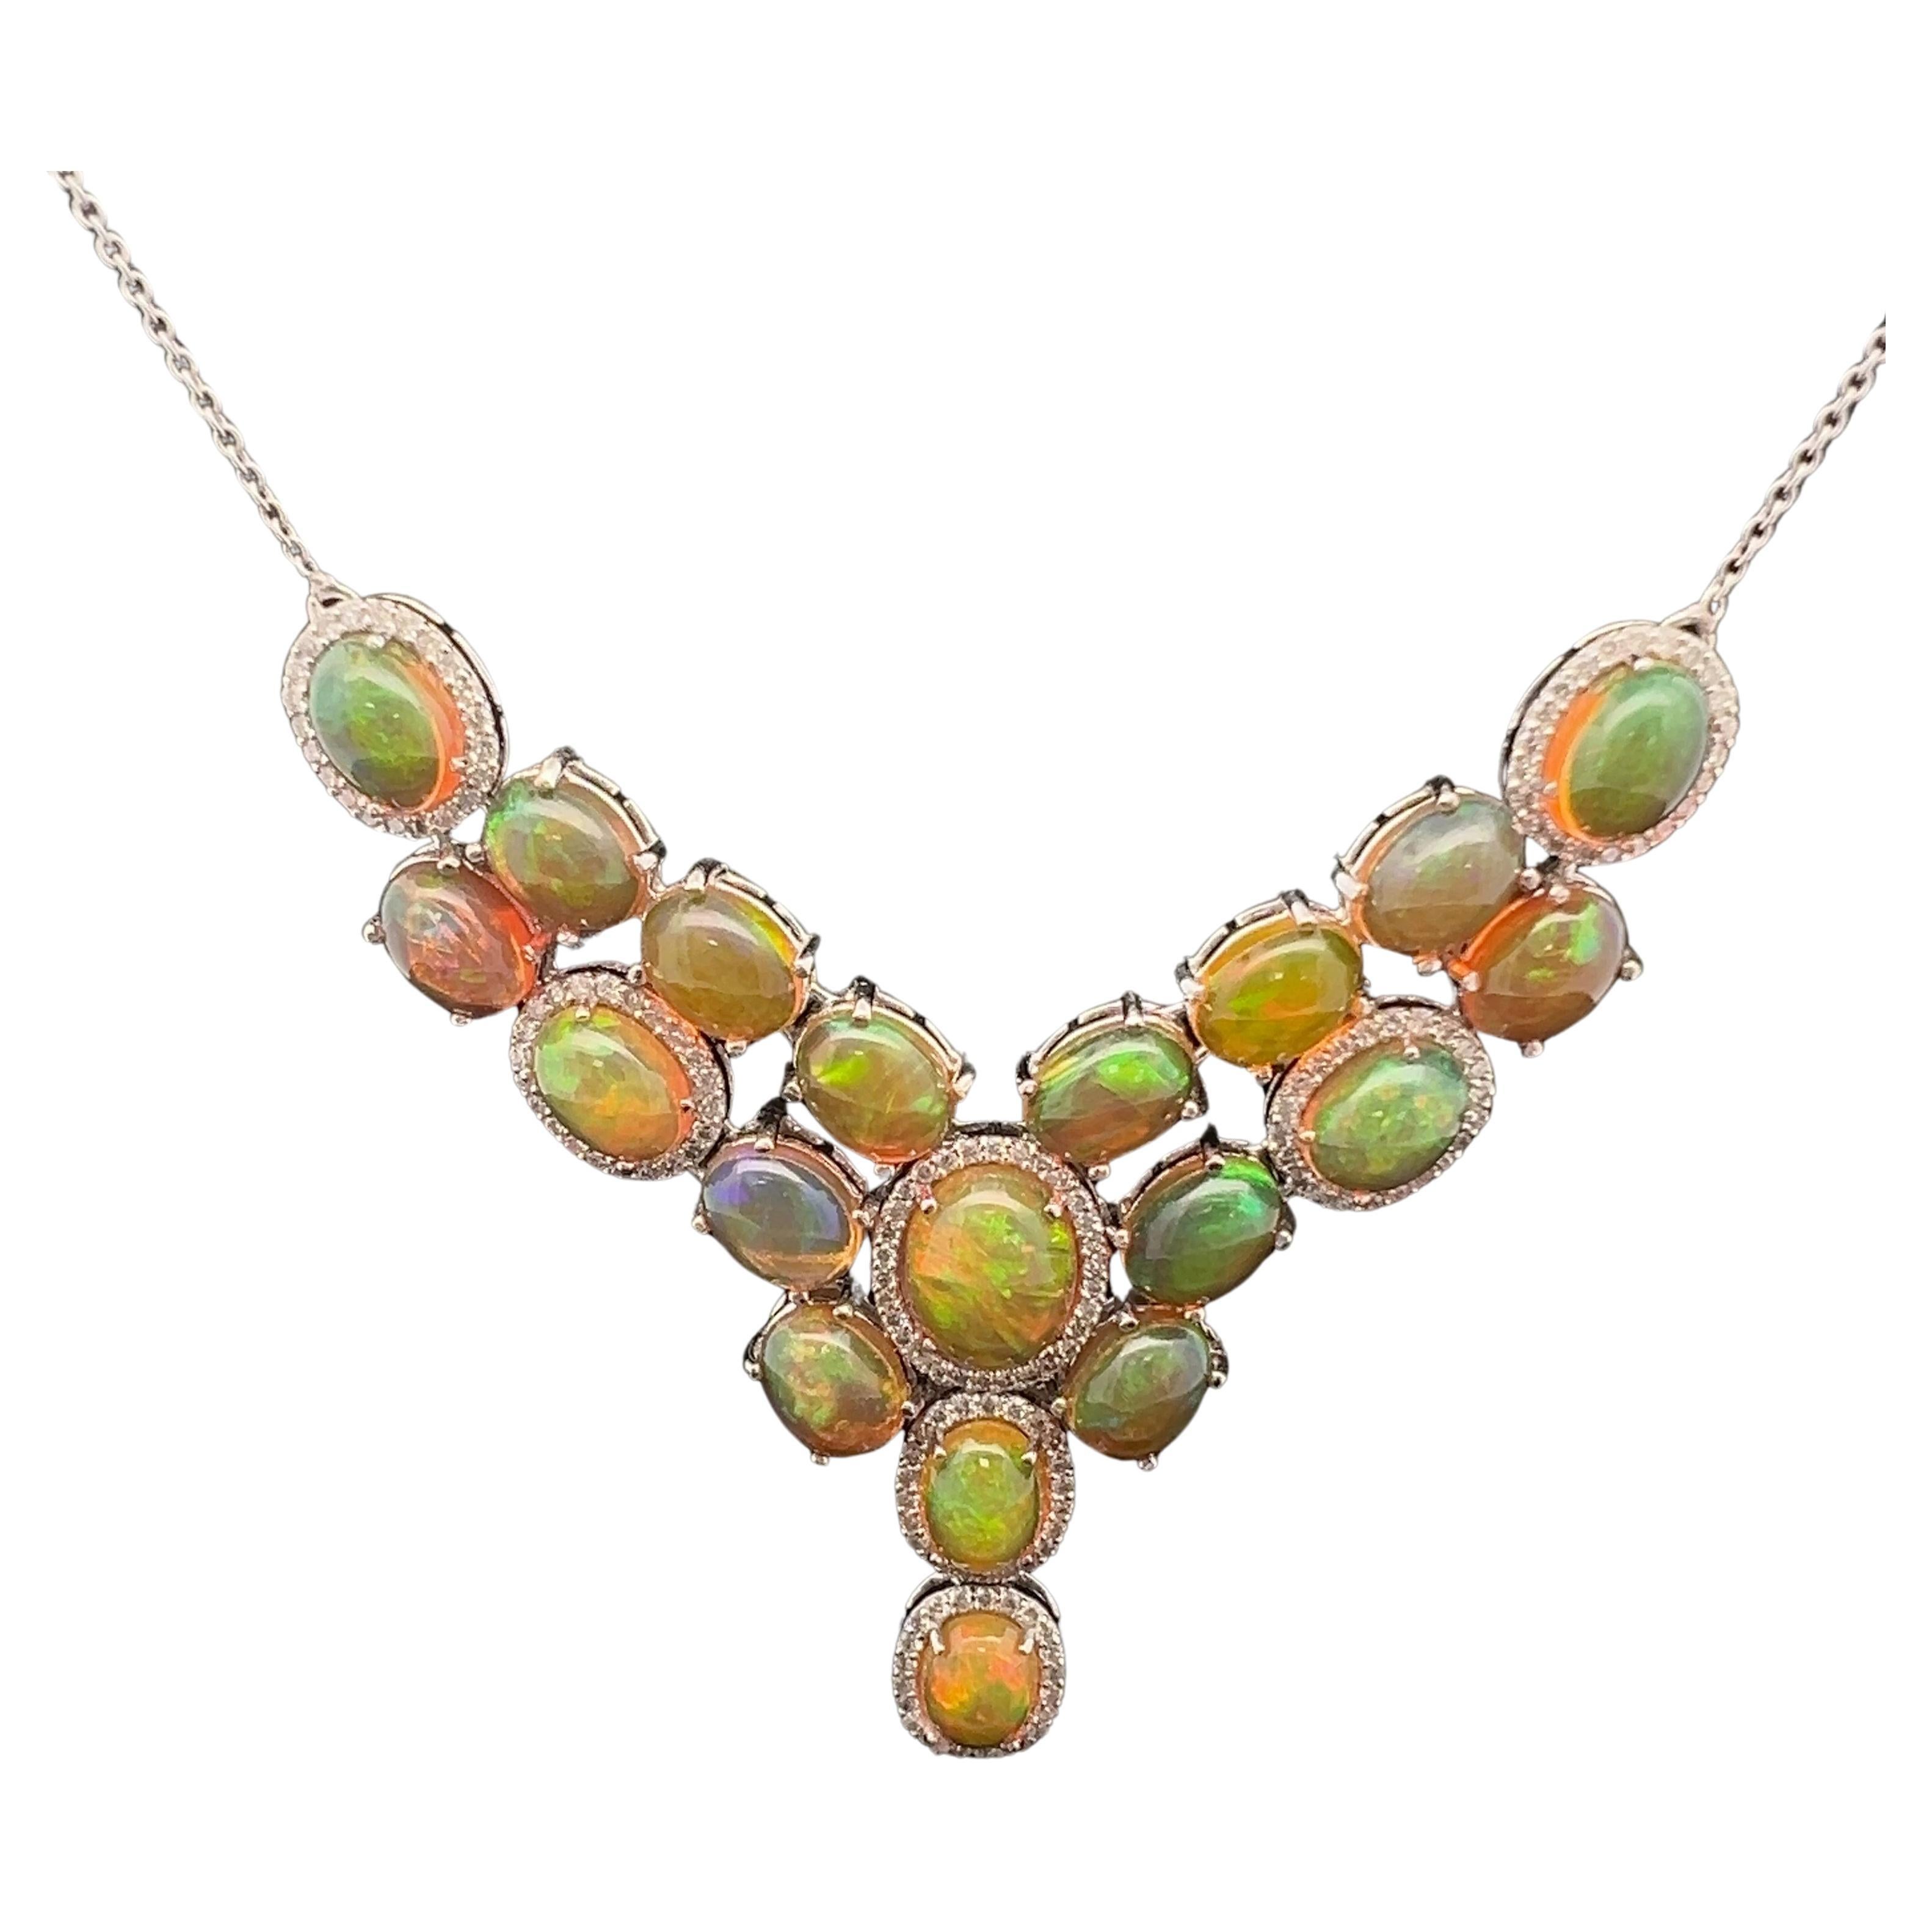 A stunning Natural Opal Diamond necklace with gold For Sale